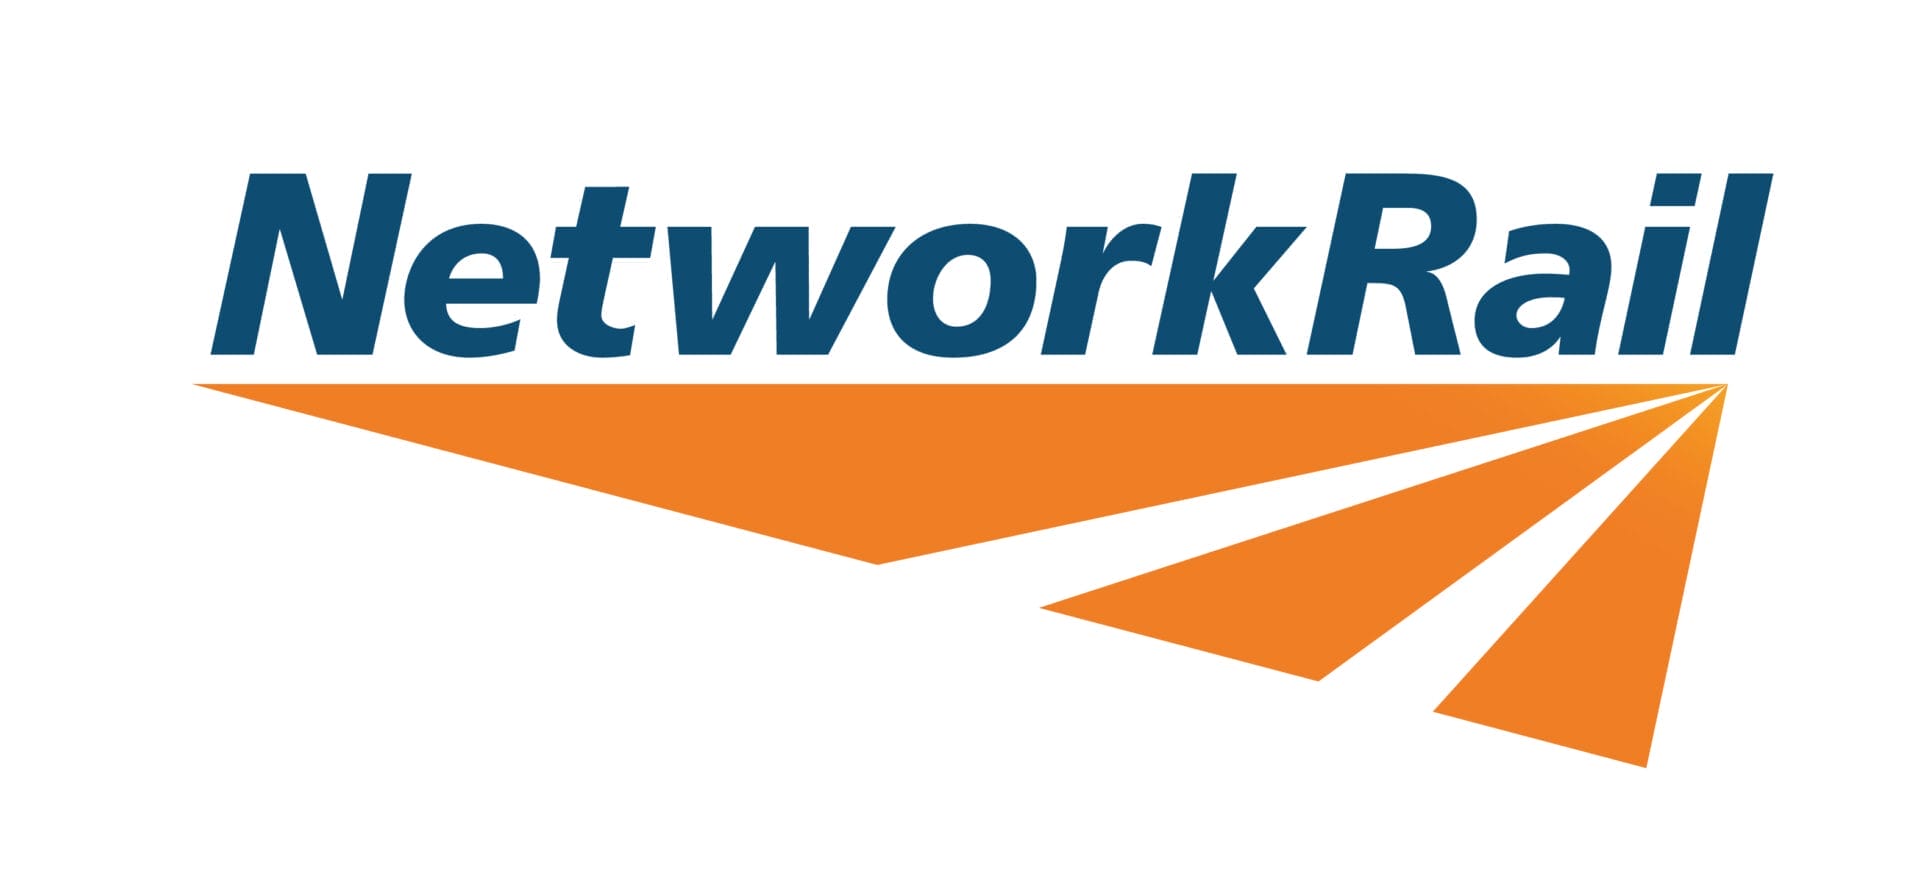 The network rail logo on a white background.